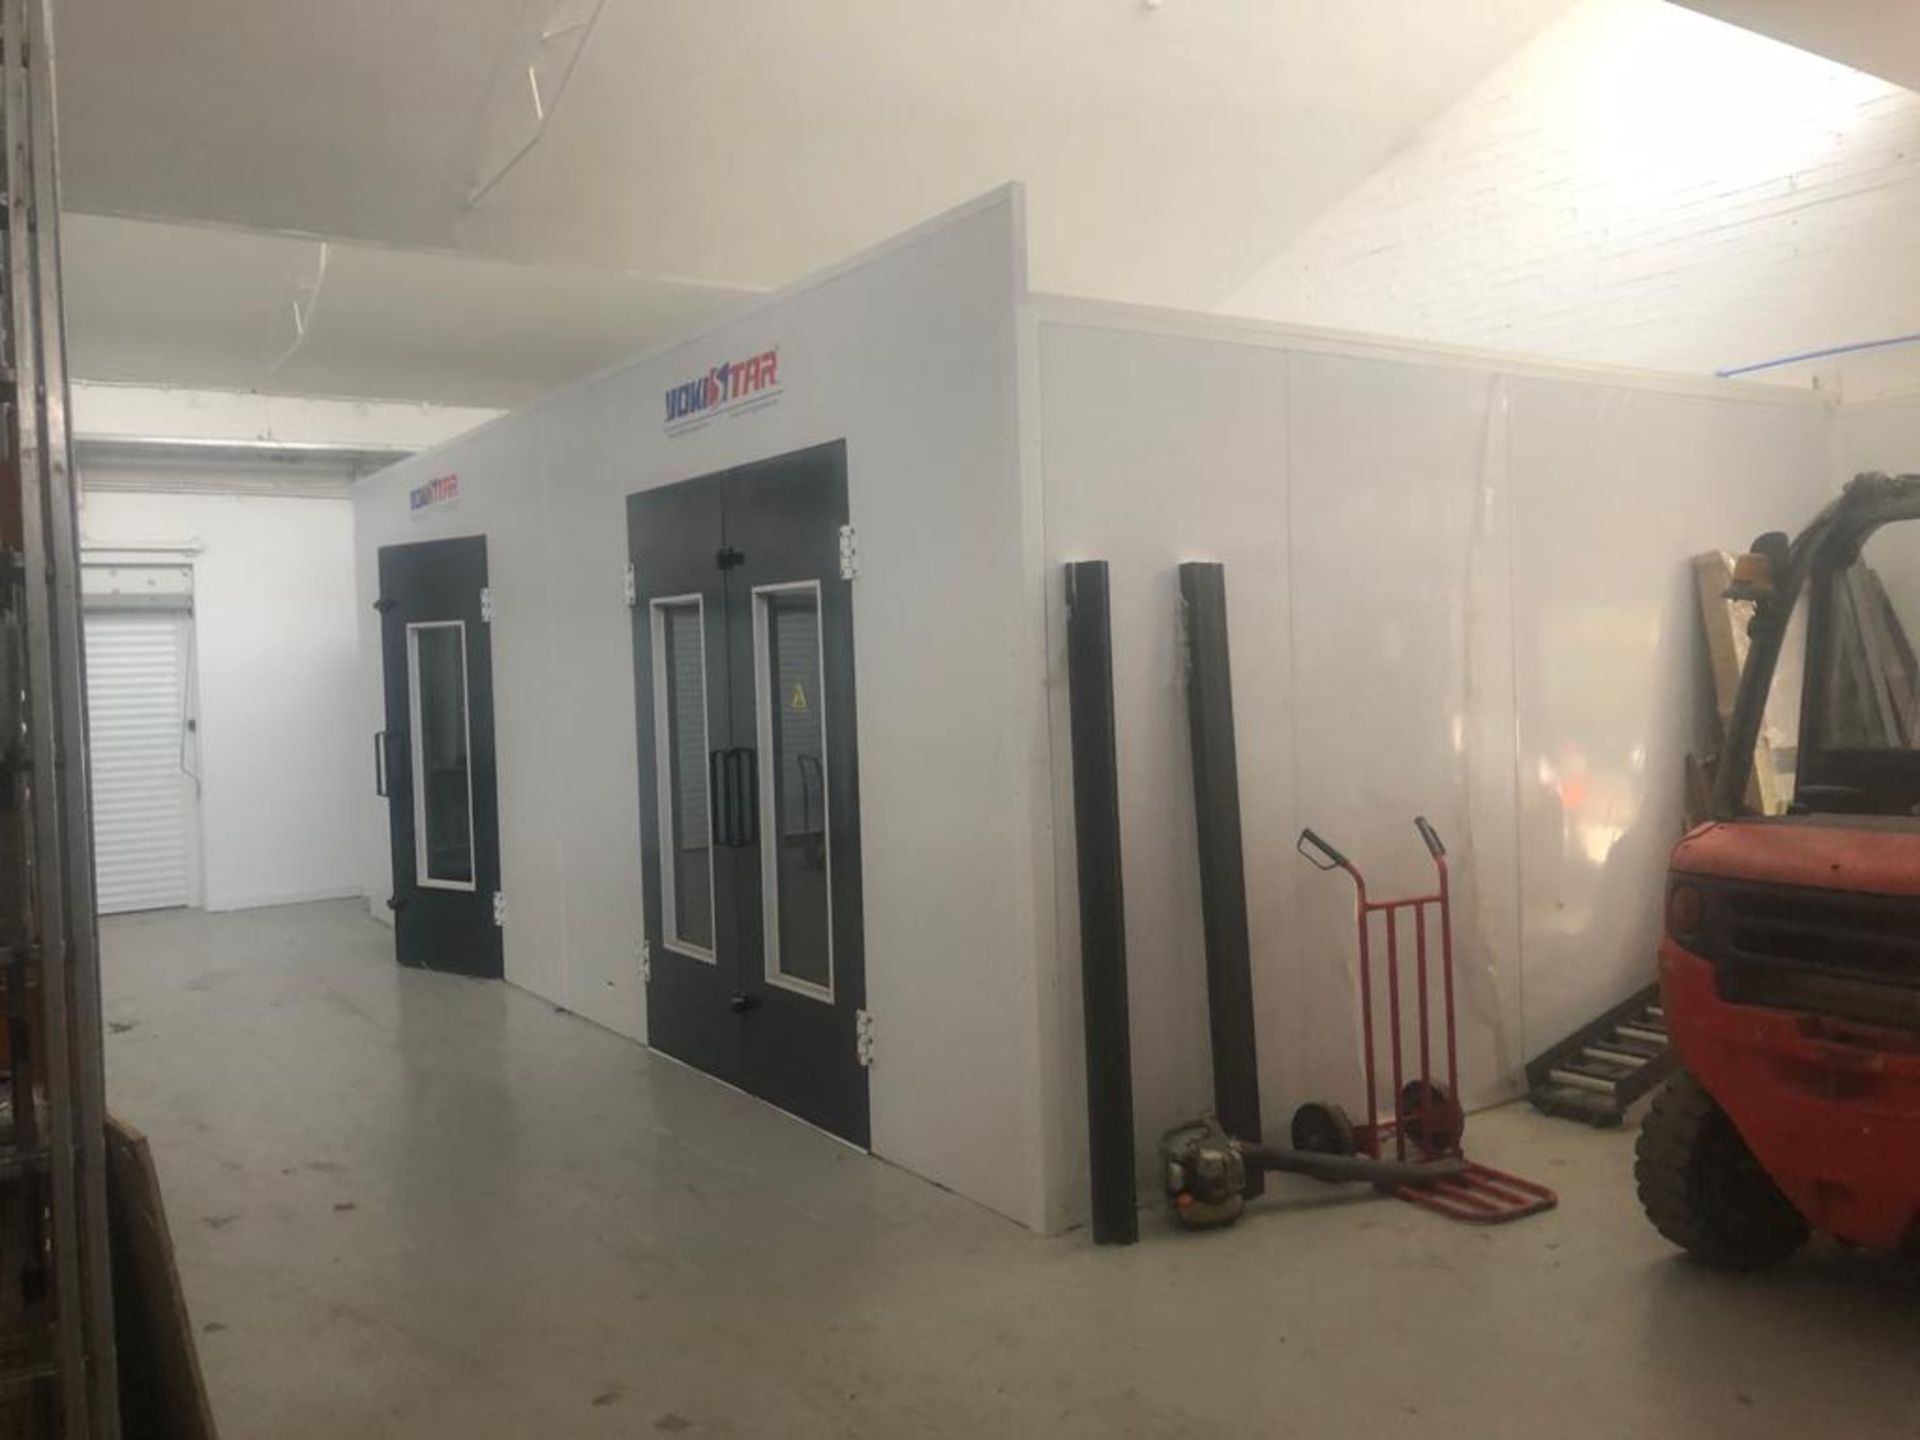 THIS IS A BRAND NEW SPRAY BOOTH WITH A DRYING ROOM USING INFARED HEATING *PLUS VAT* - Image 4 of 18